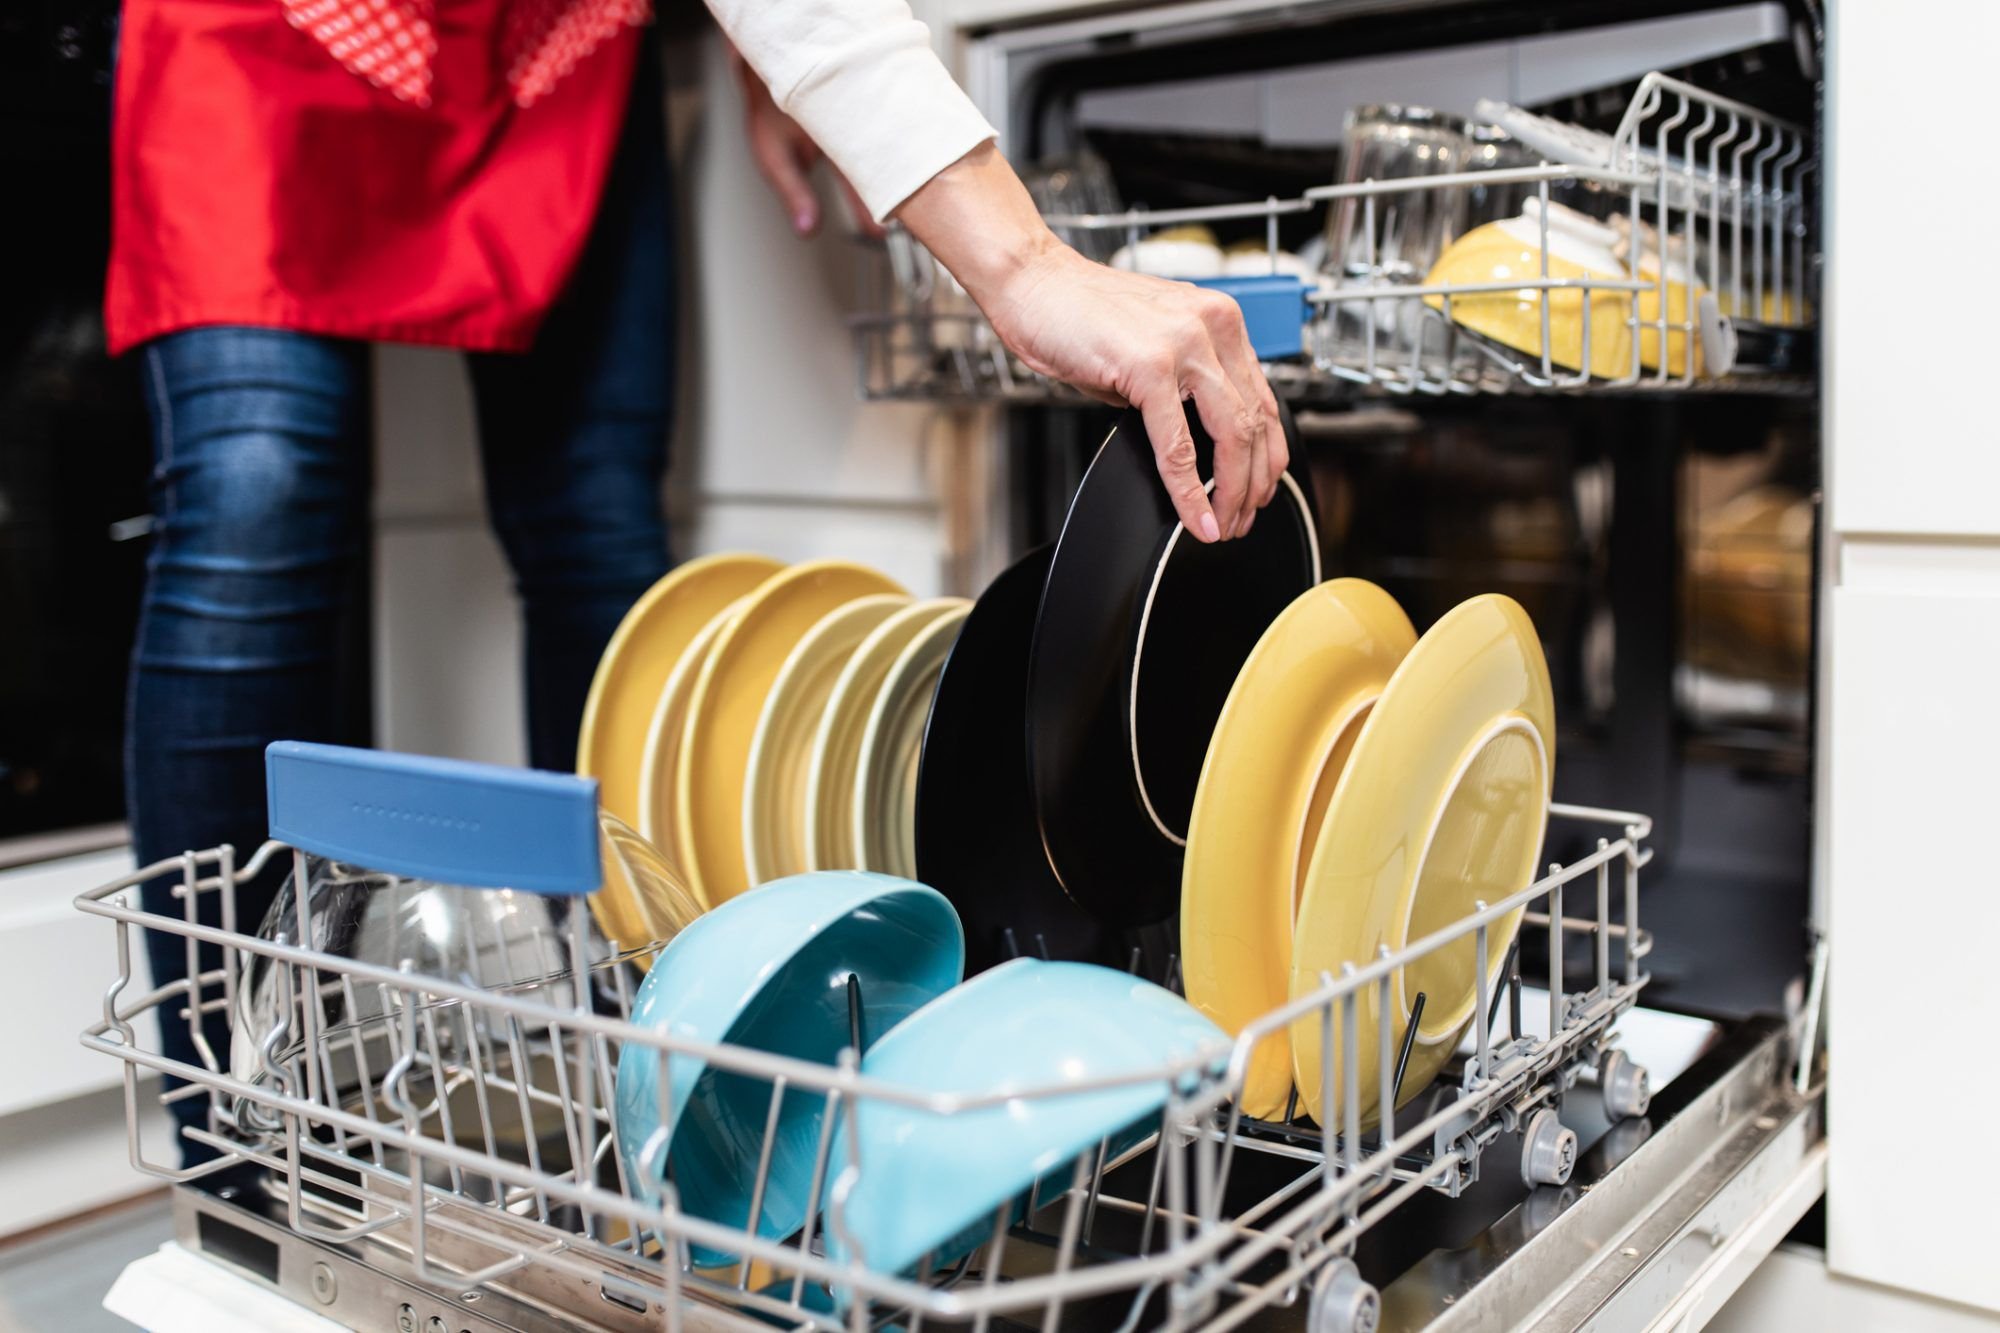 Is There a Right Way to Load a Dishwasher?